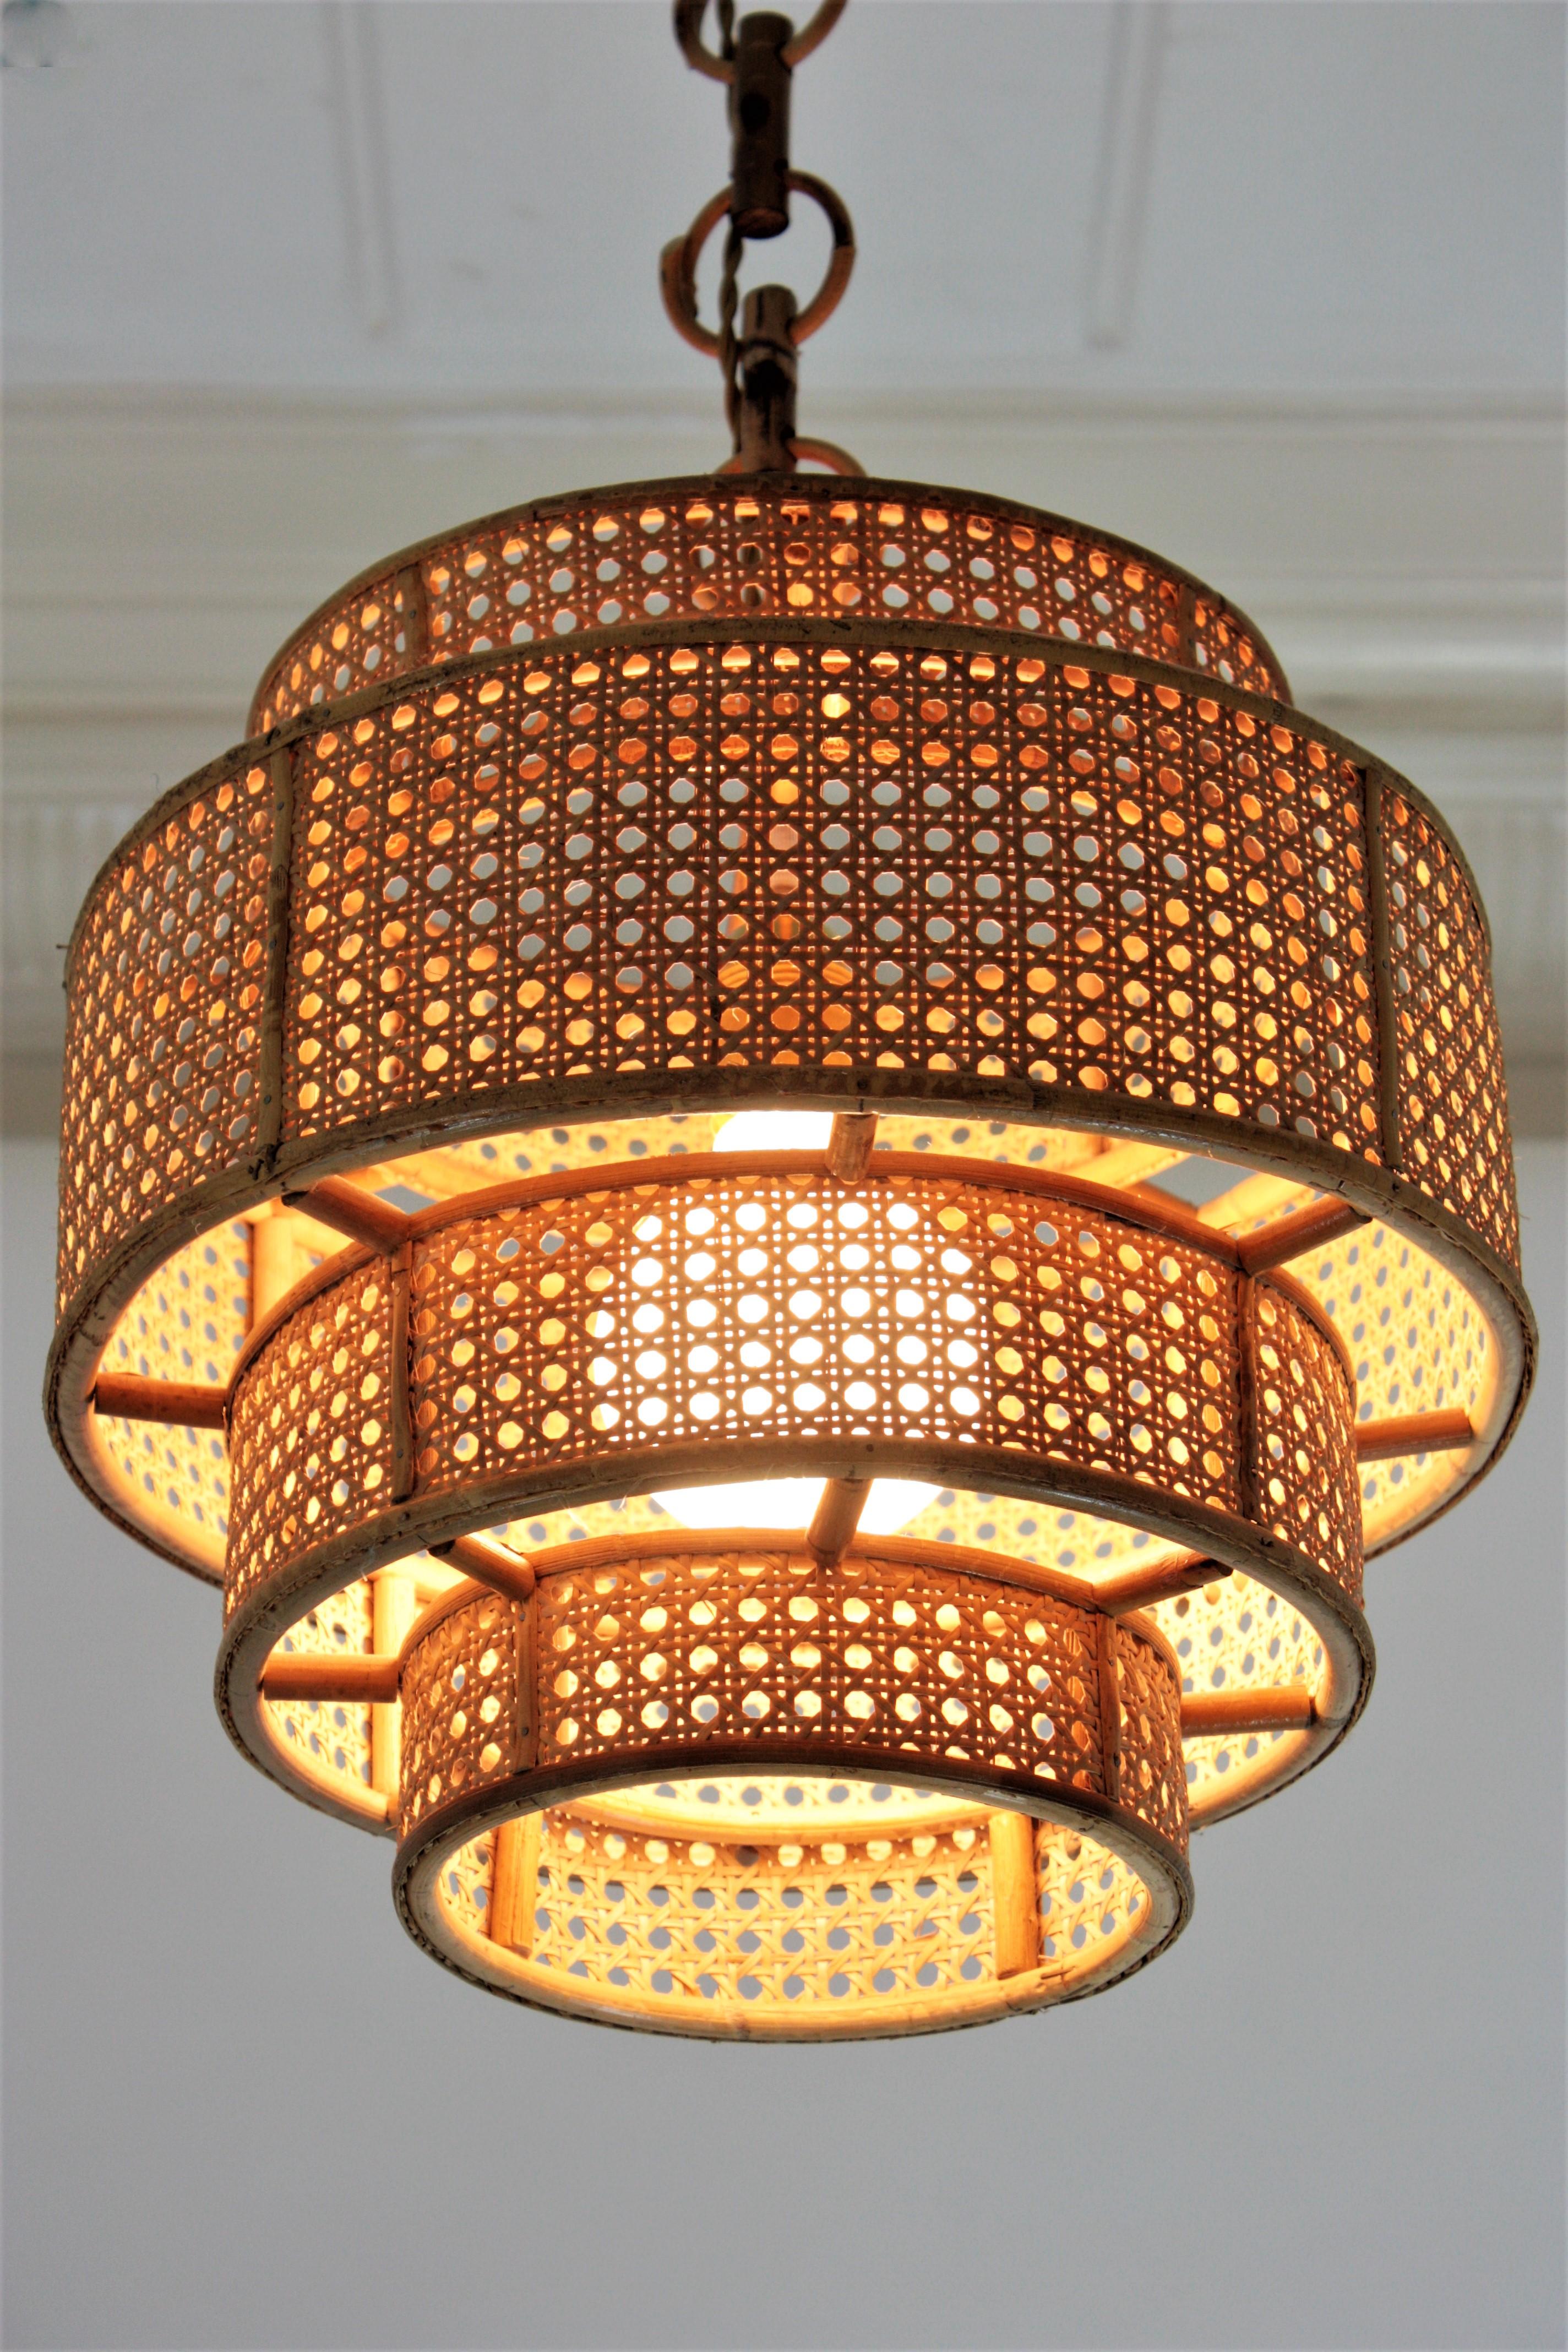  Rattan Wicker Weave Concentric Cylinder Pendant Hanging Light, 1960s For Sale 9